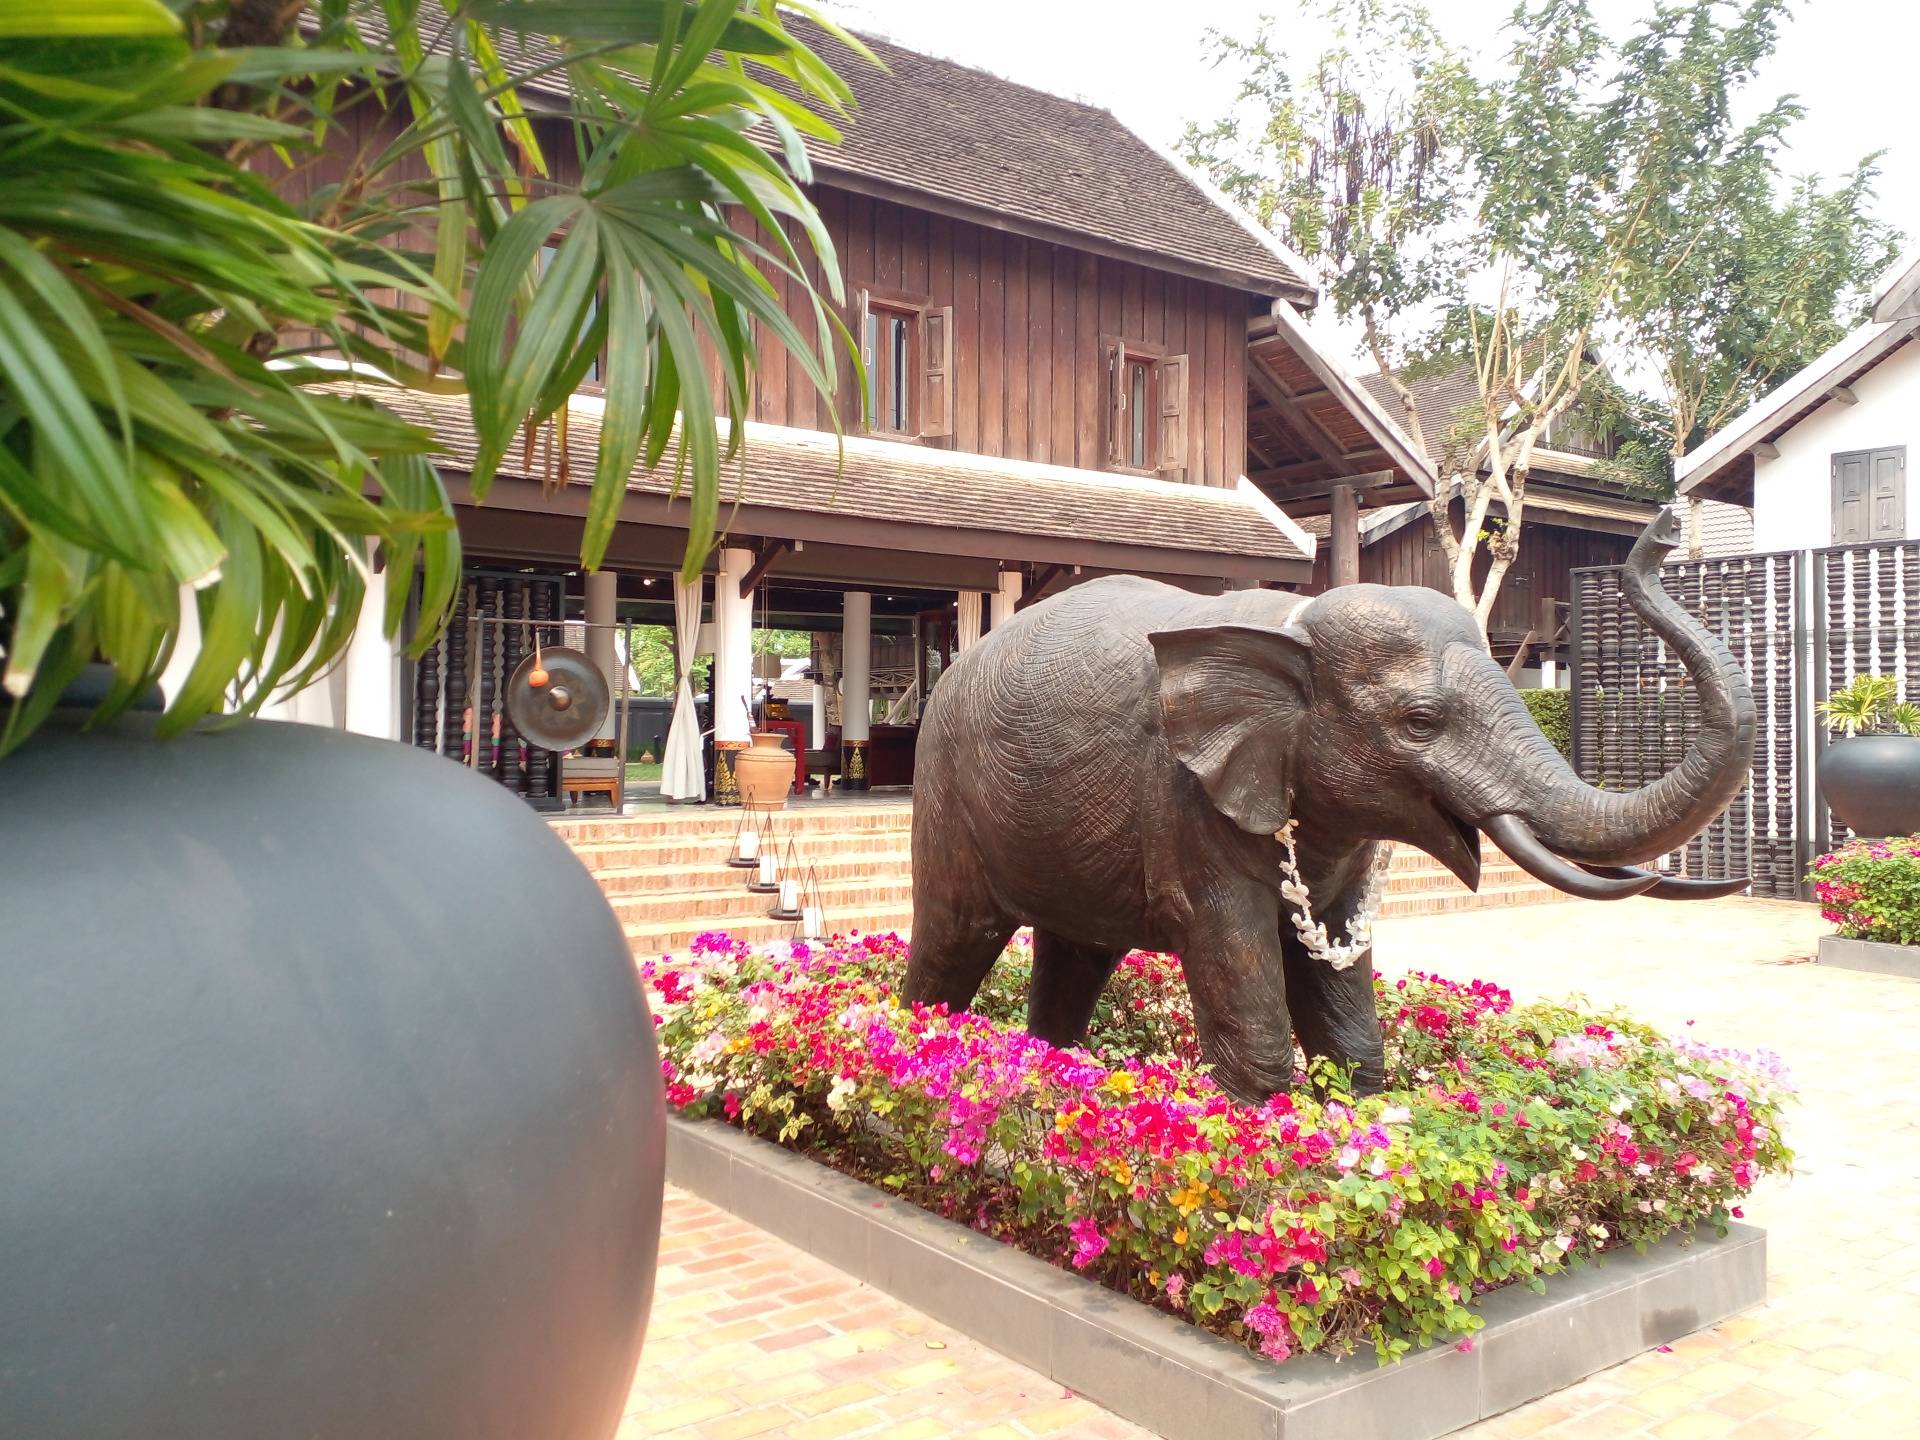 Le Spa: Ancient Prison turned SOFITEL in Luang Prabang